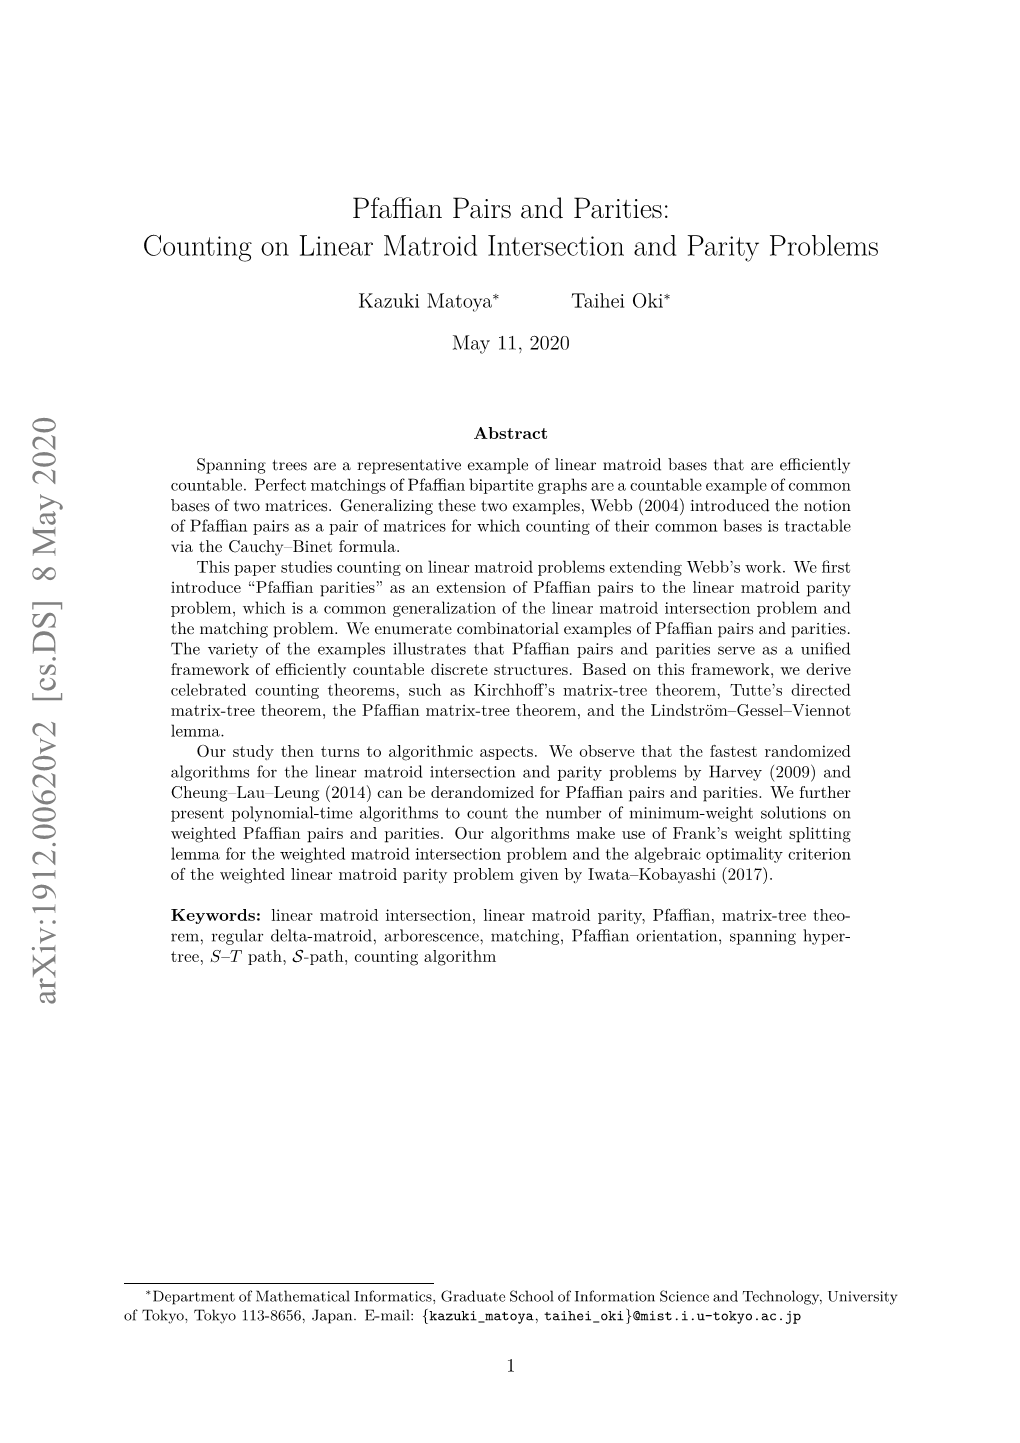 Pfaffian Pairs and Parities: Counting on Linear Matroid Intersection And